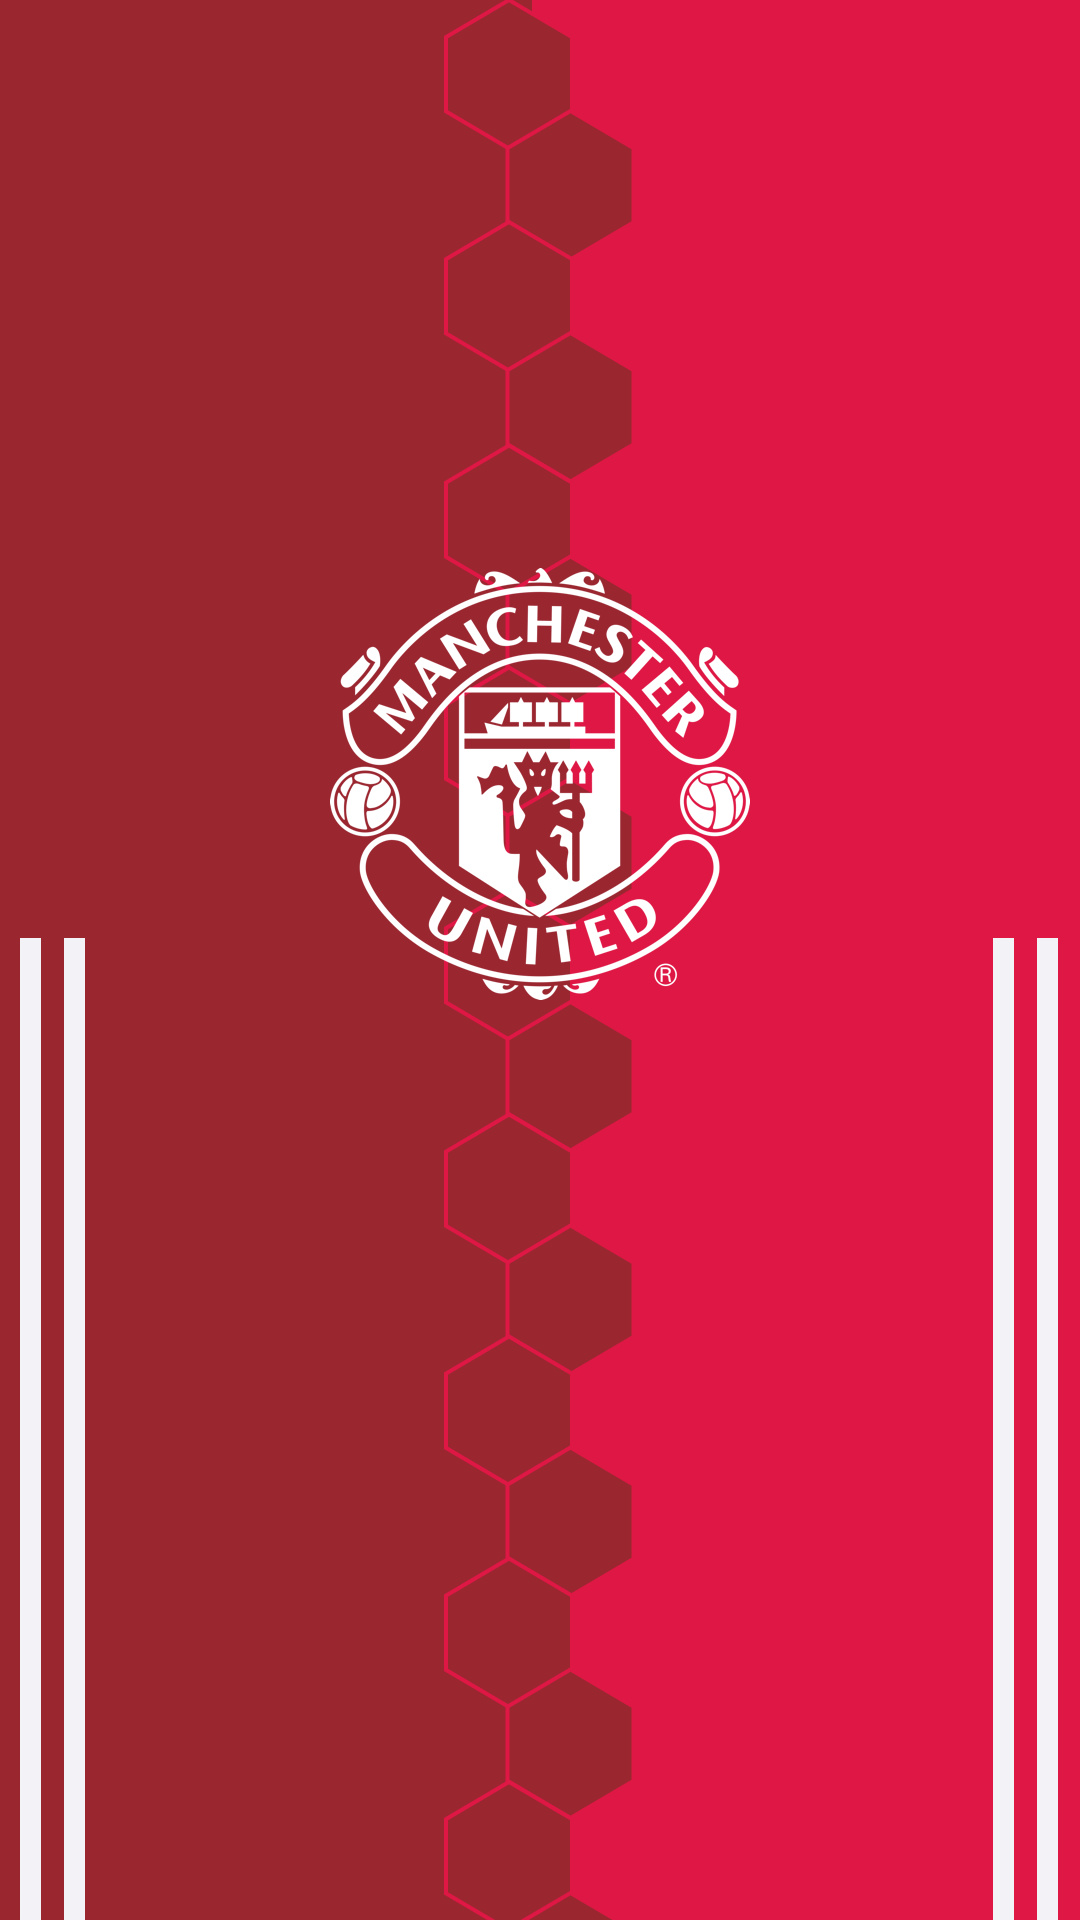 Manchester United: The first British team to win the FIFA Club World Cup. 1080x1920 Full HD Background.